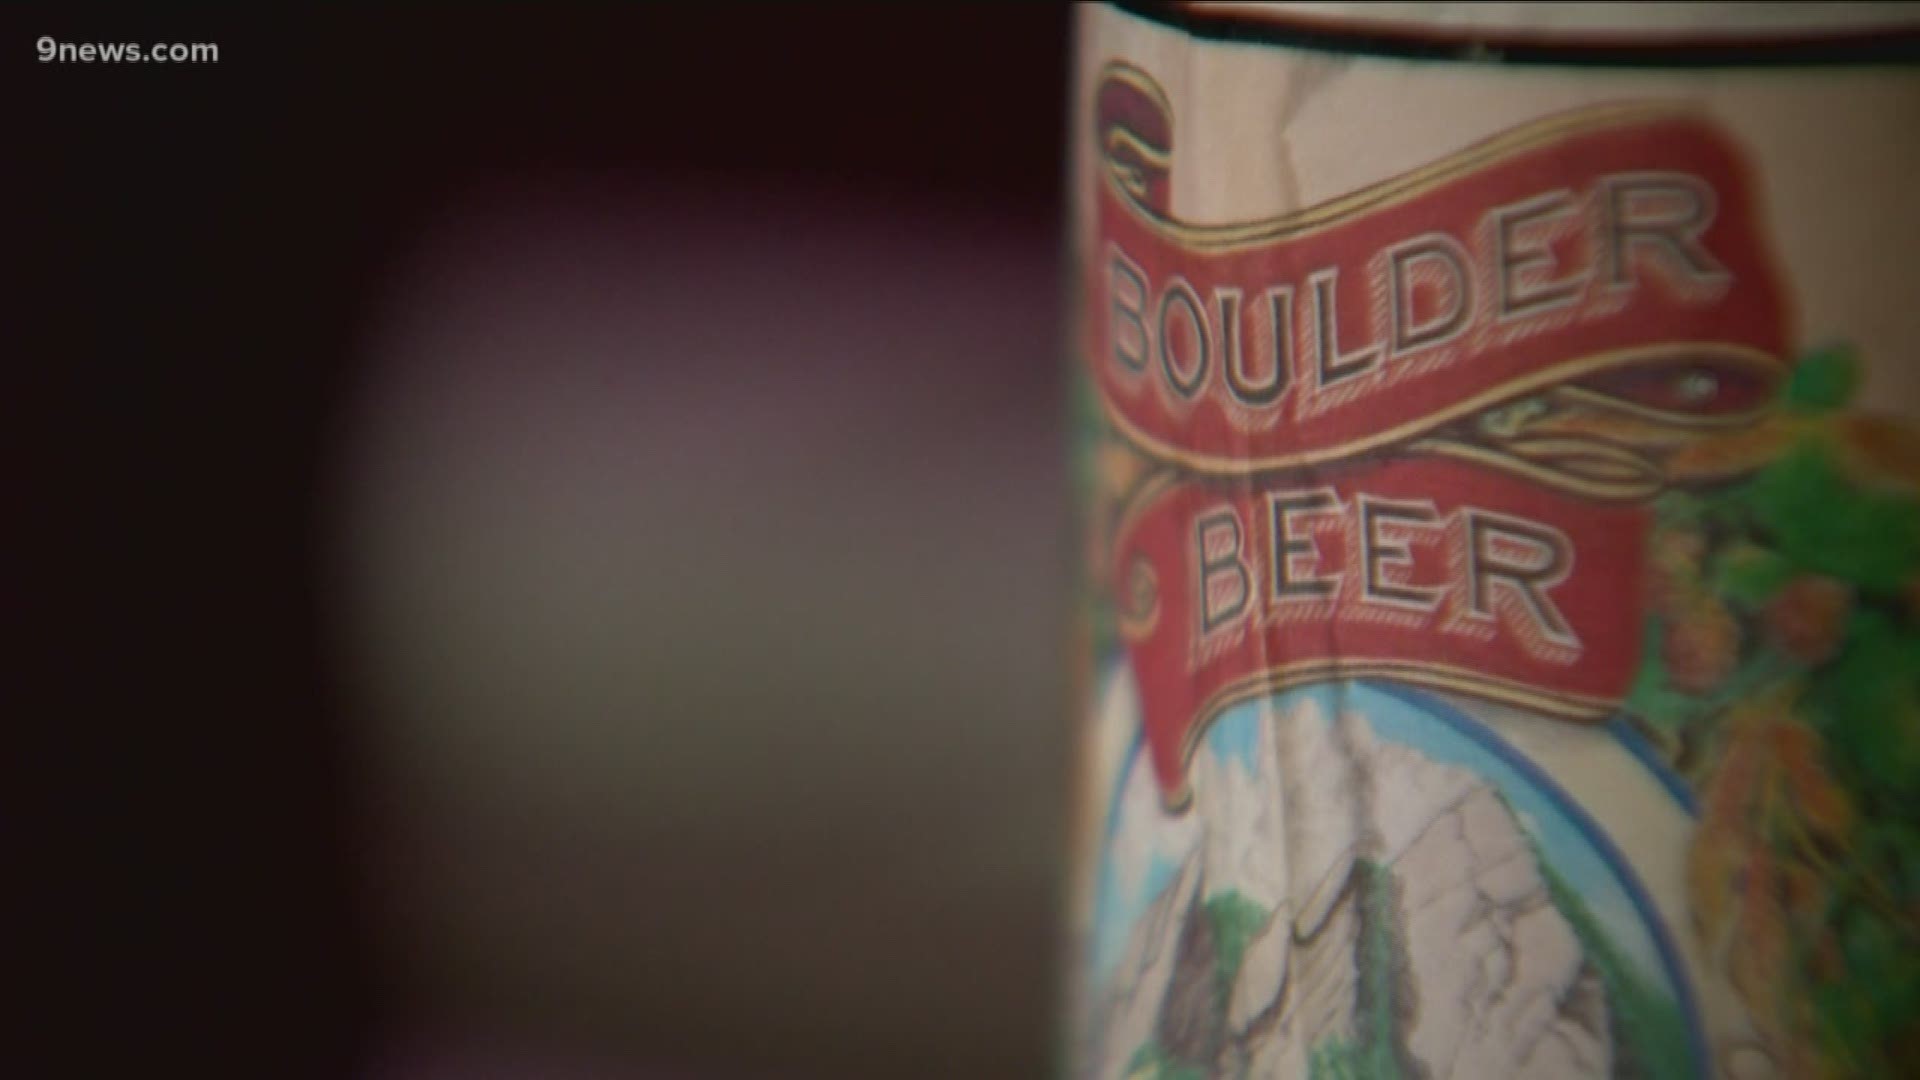 Boulder Beer will shut down its pub on Jan. 18, leaving the brew available only through distribution.